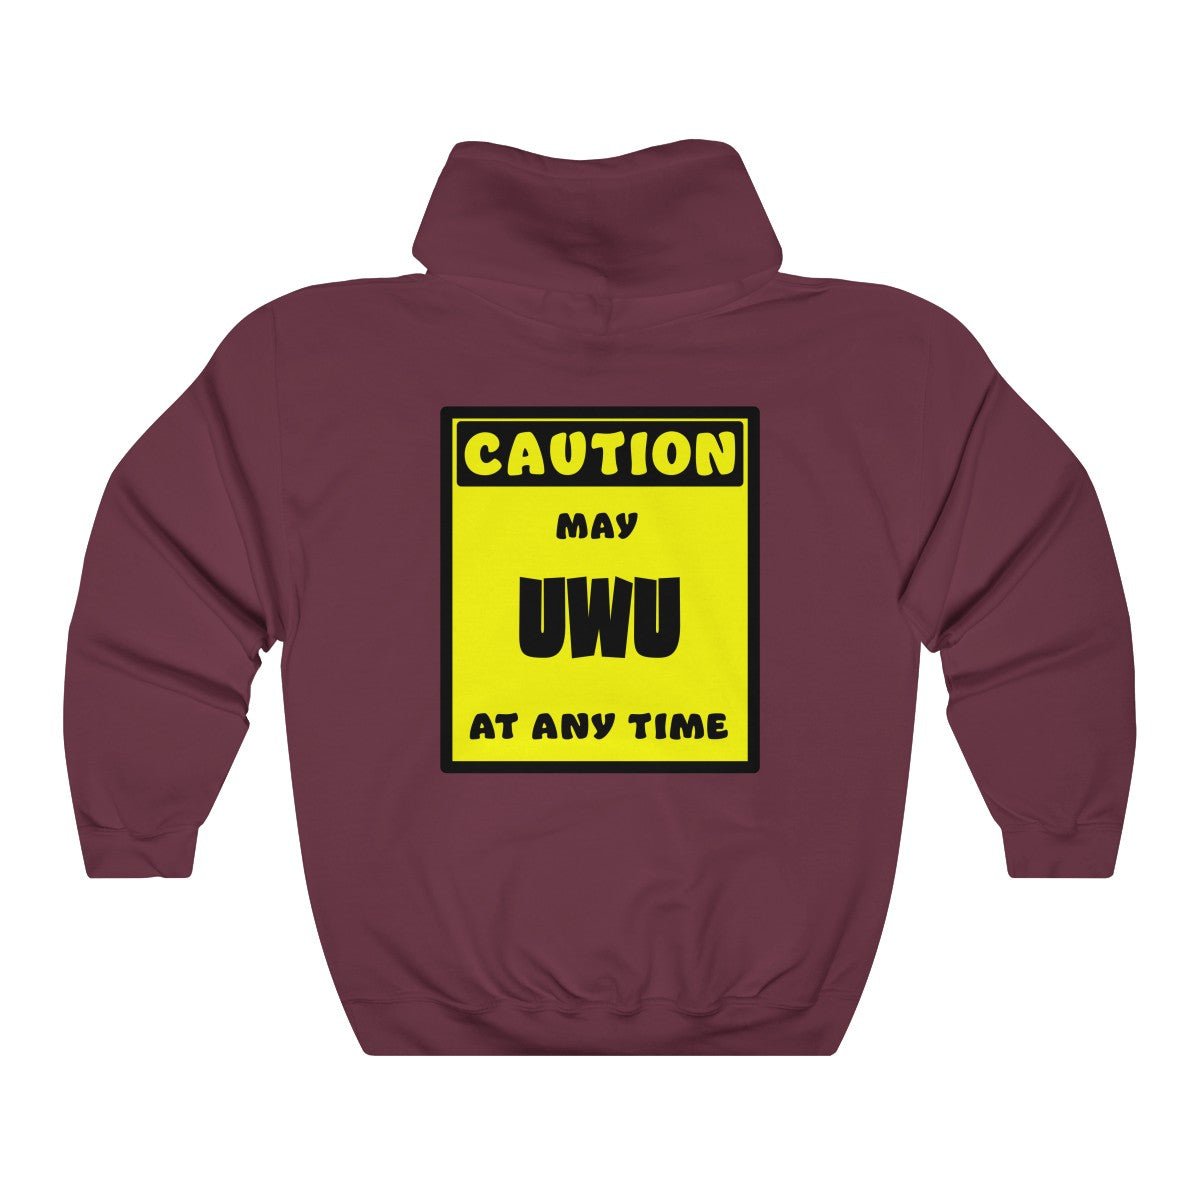 CAUTION! May UWU at any time! - Hoodie Hoodie AFLT-Whootorca Maroon S 